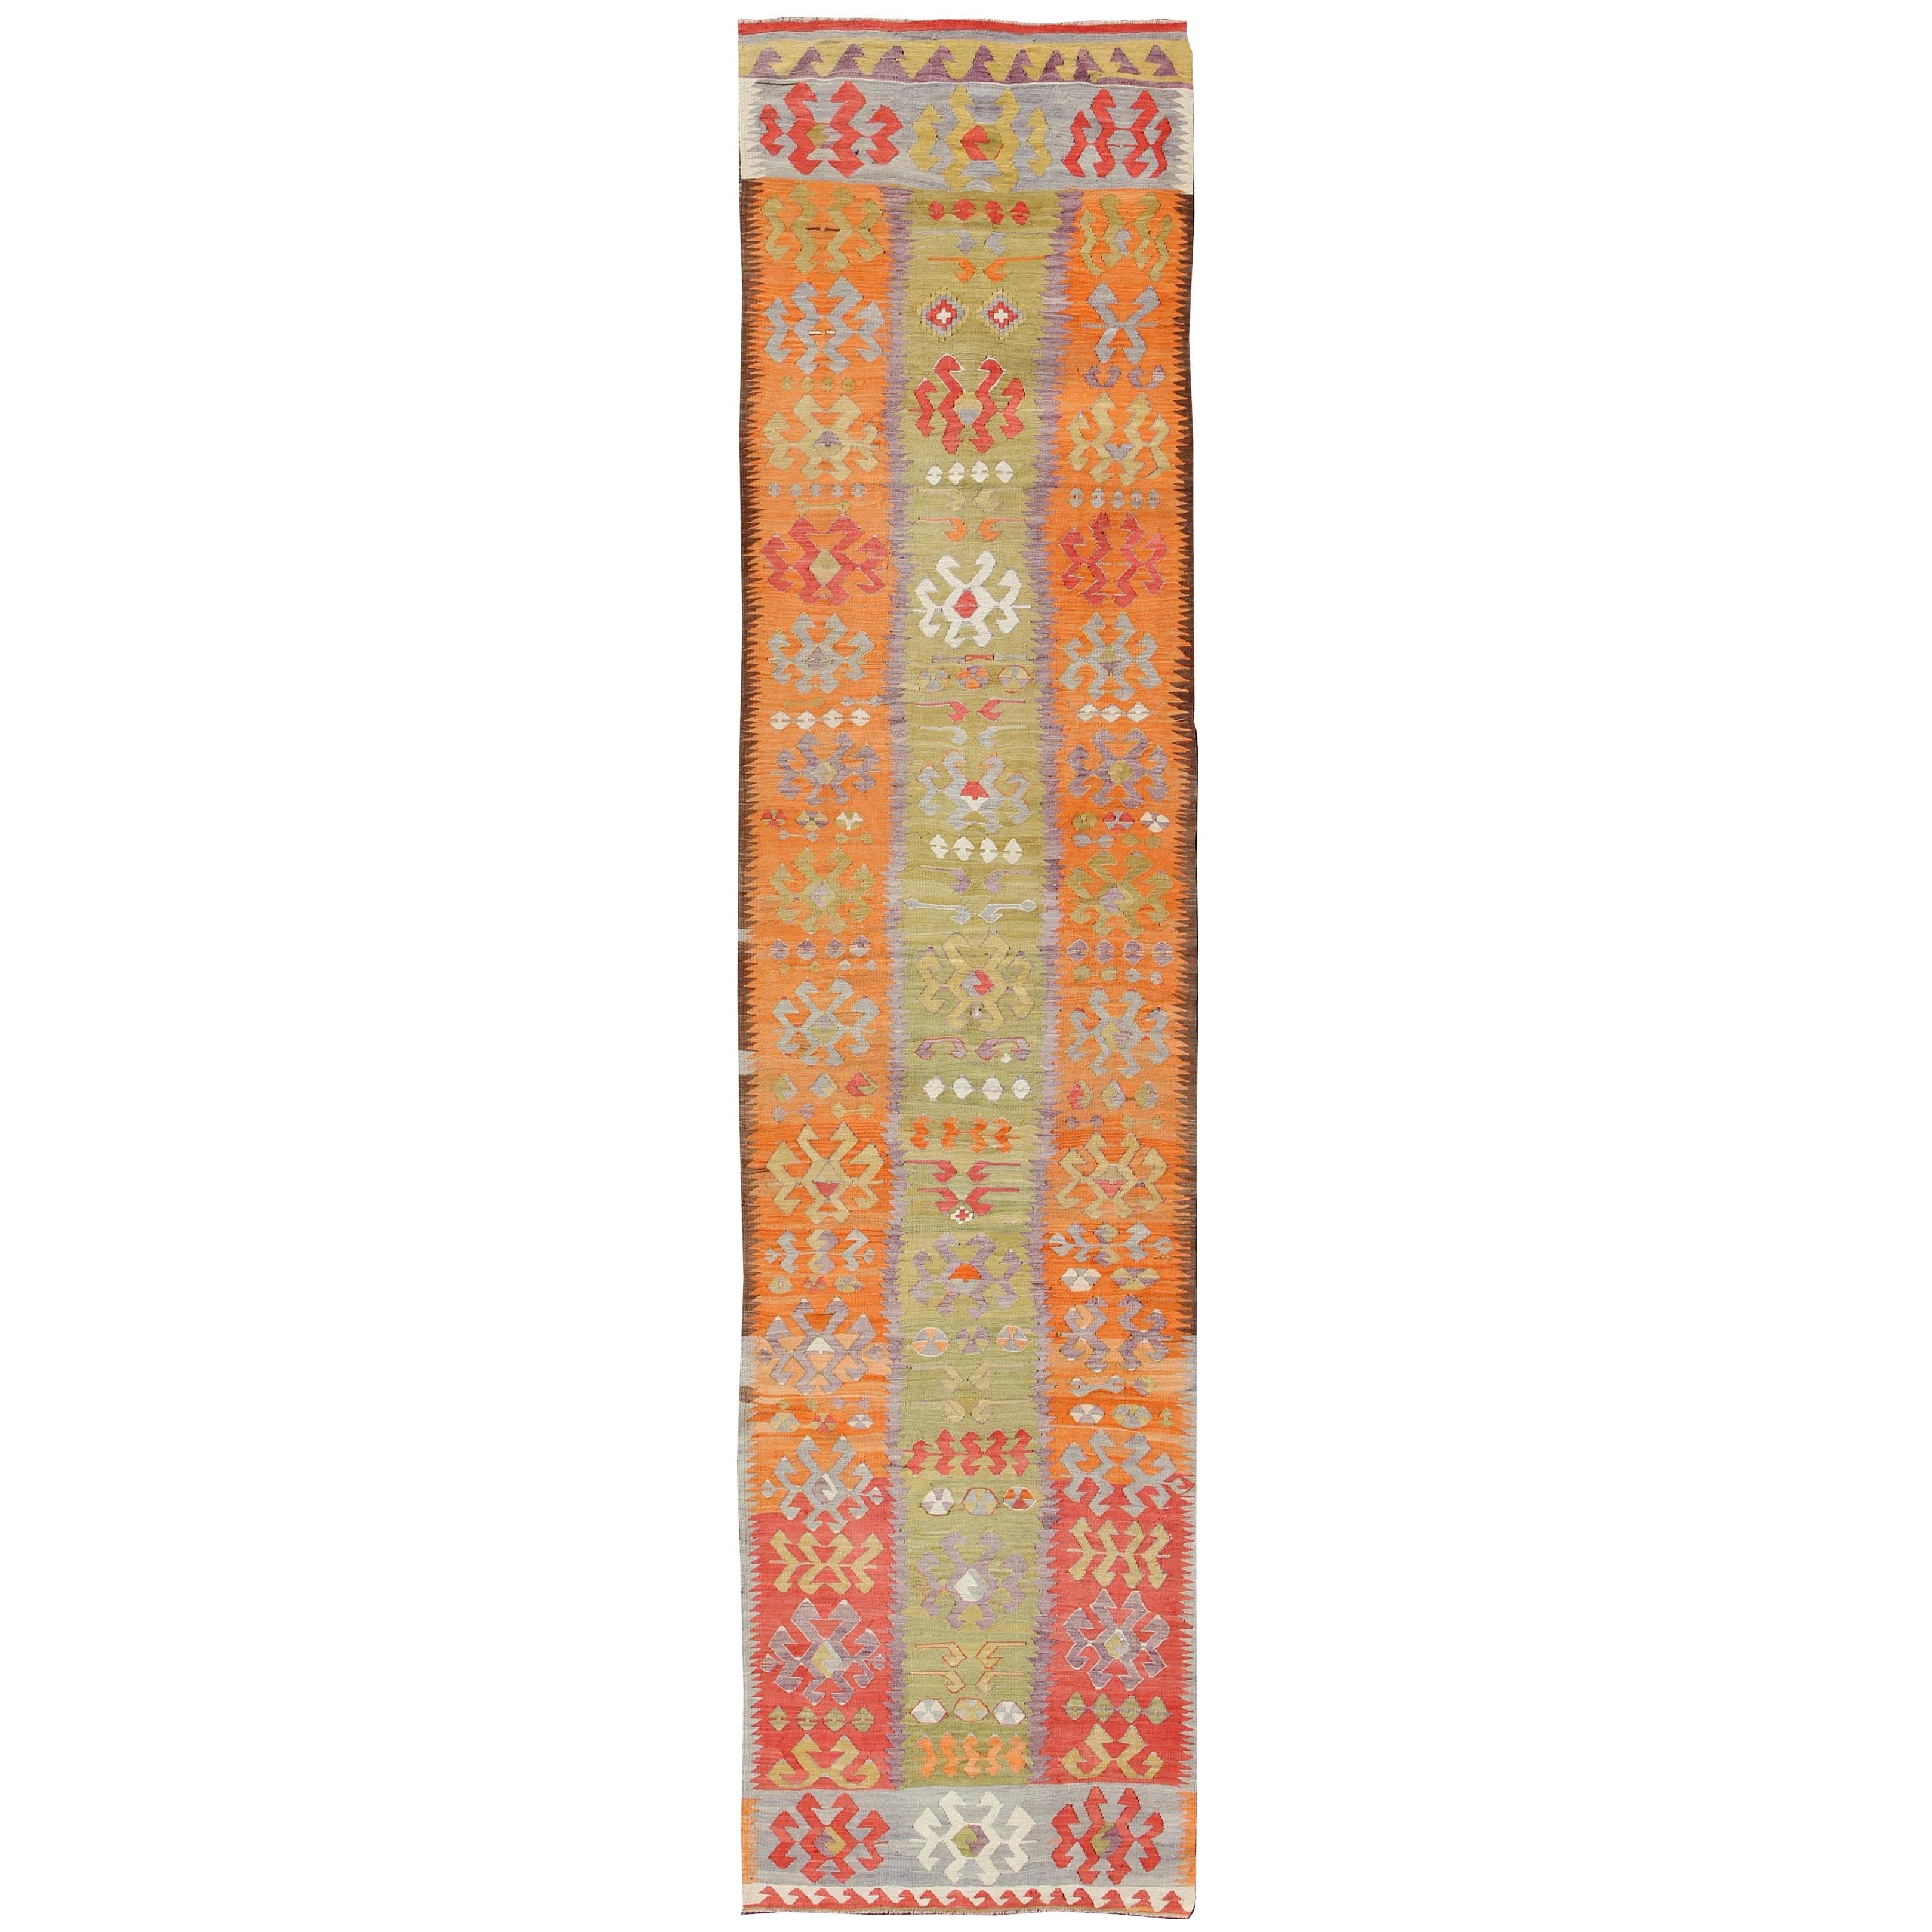 Long Kilim Runner with Tribal Design in Citron Green, Red and Orange